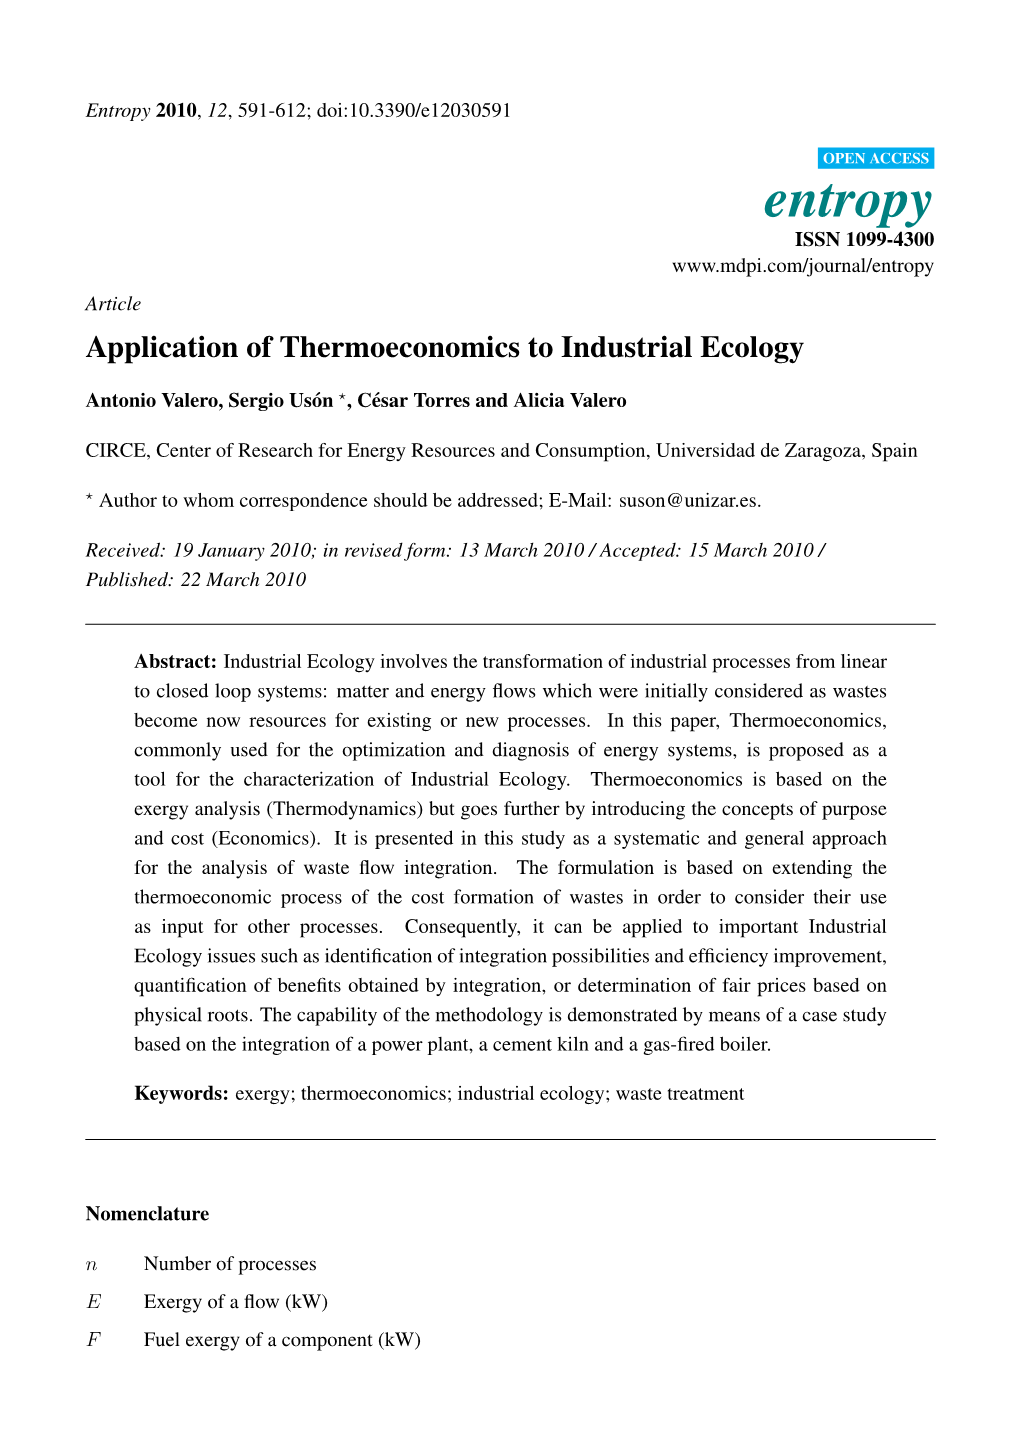 Application of Thermoeconomics to Industrial Ecology